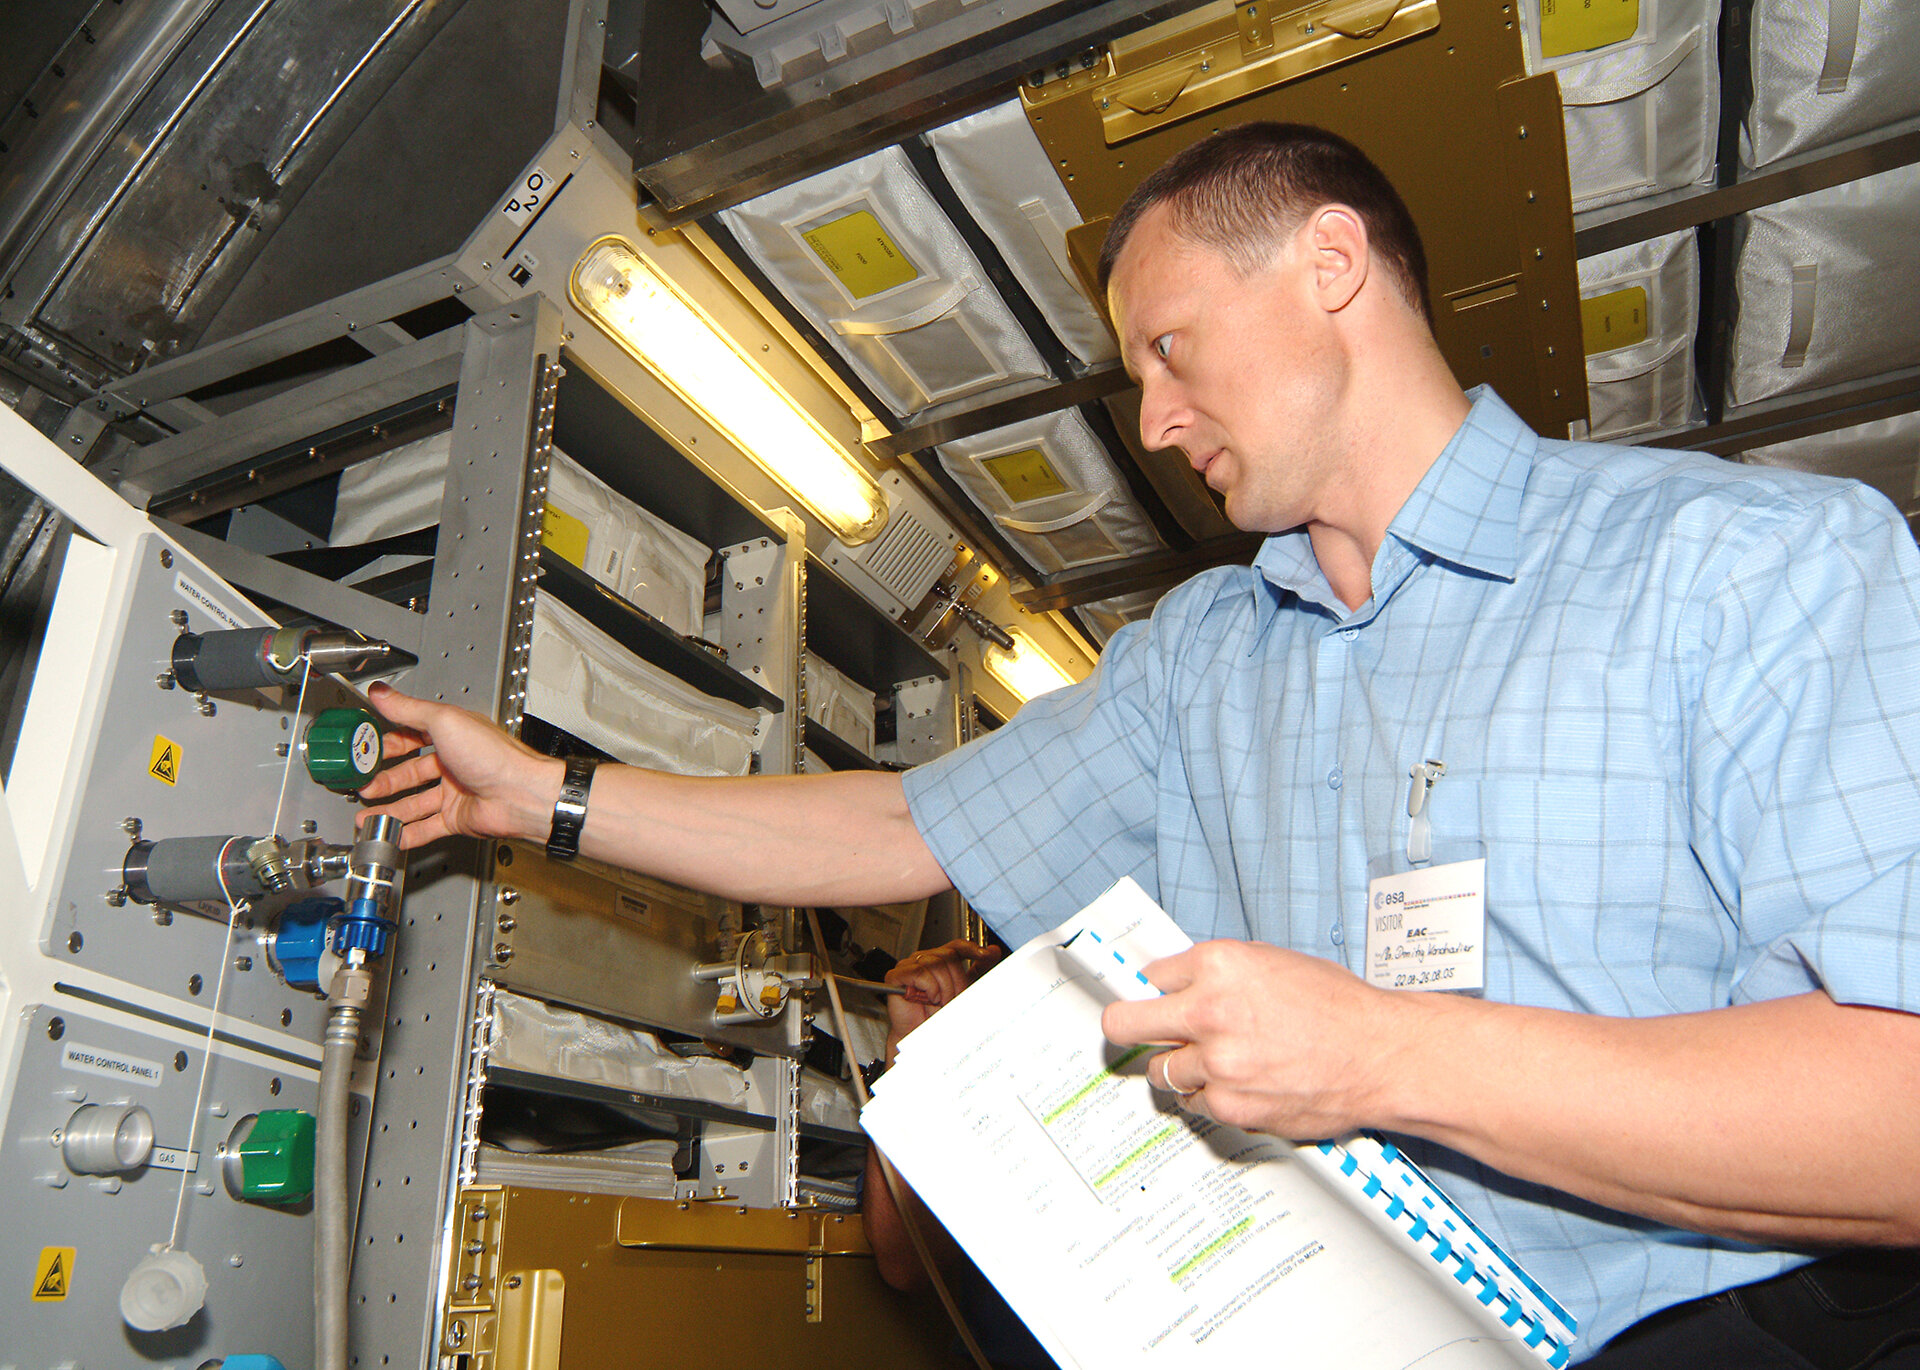 Checking valves on the water control panel inside EAC's ATV mock-up